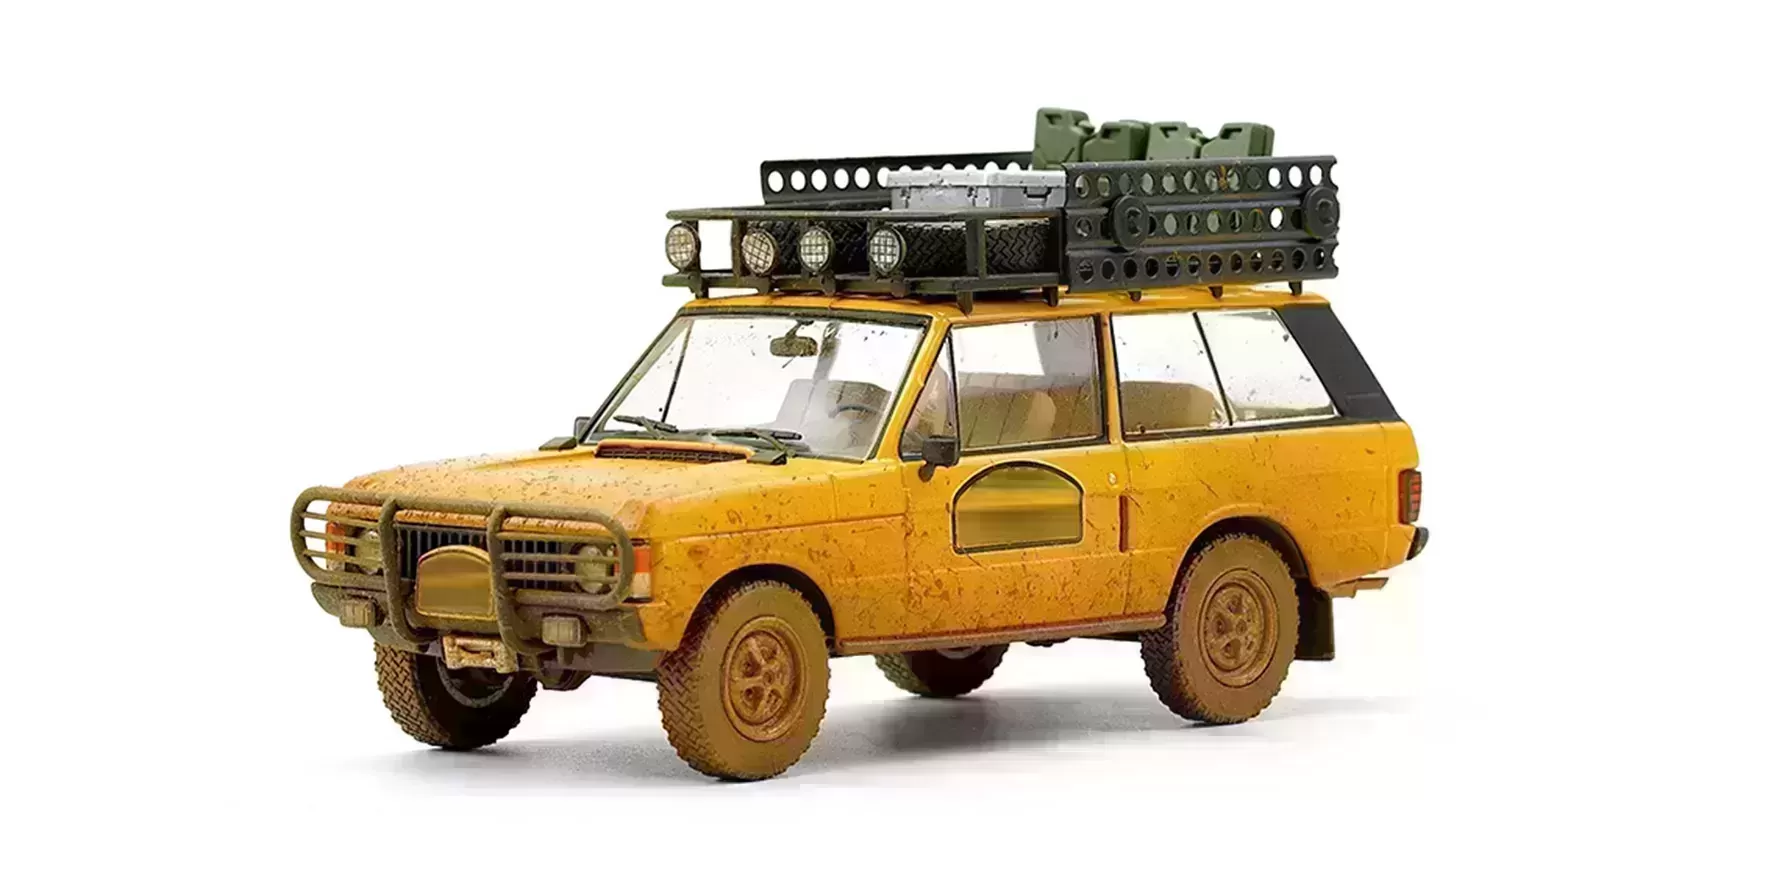 Range Rover Camel Trophy Papua New Guinea 1982 Dirty version - 1:43